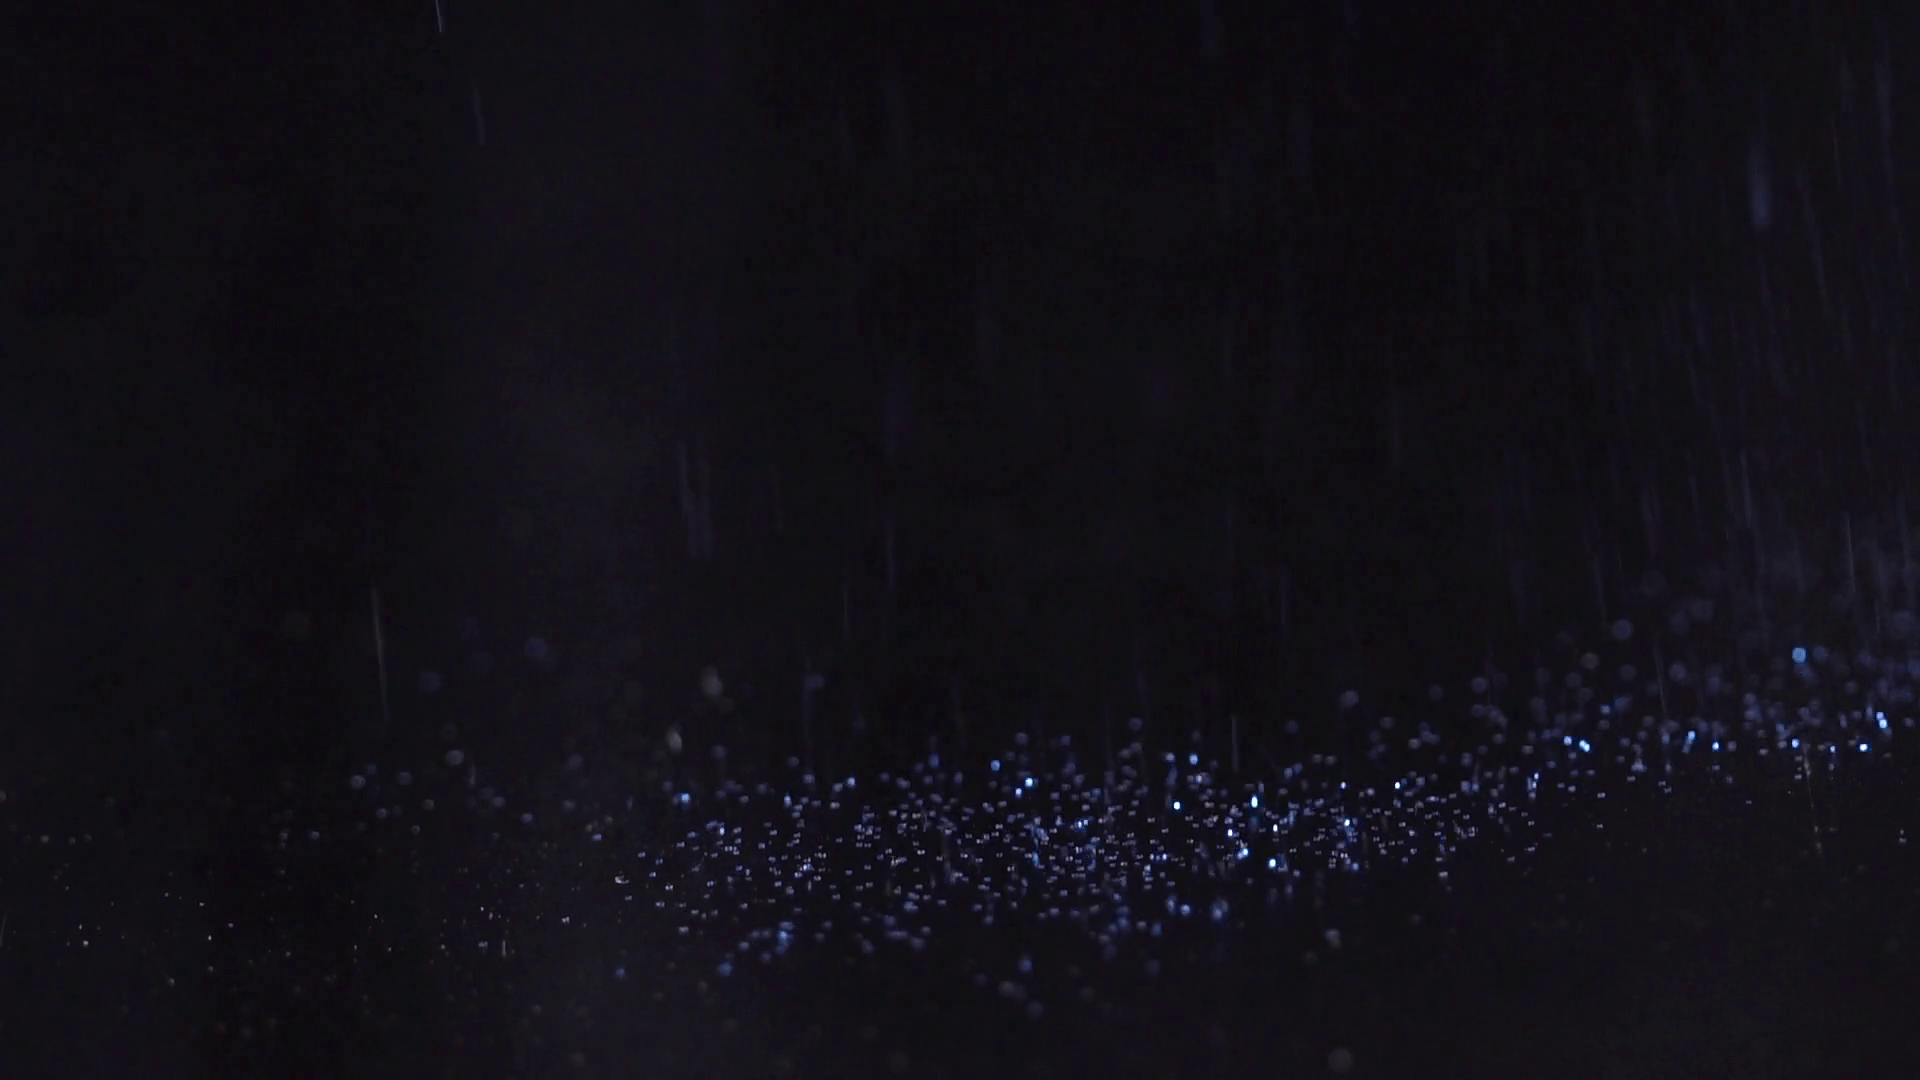 Blue sparkles falling on the black background, abstract slow motion